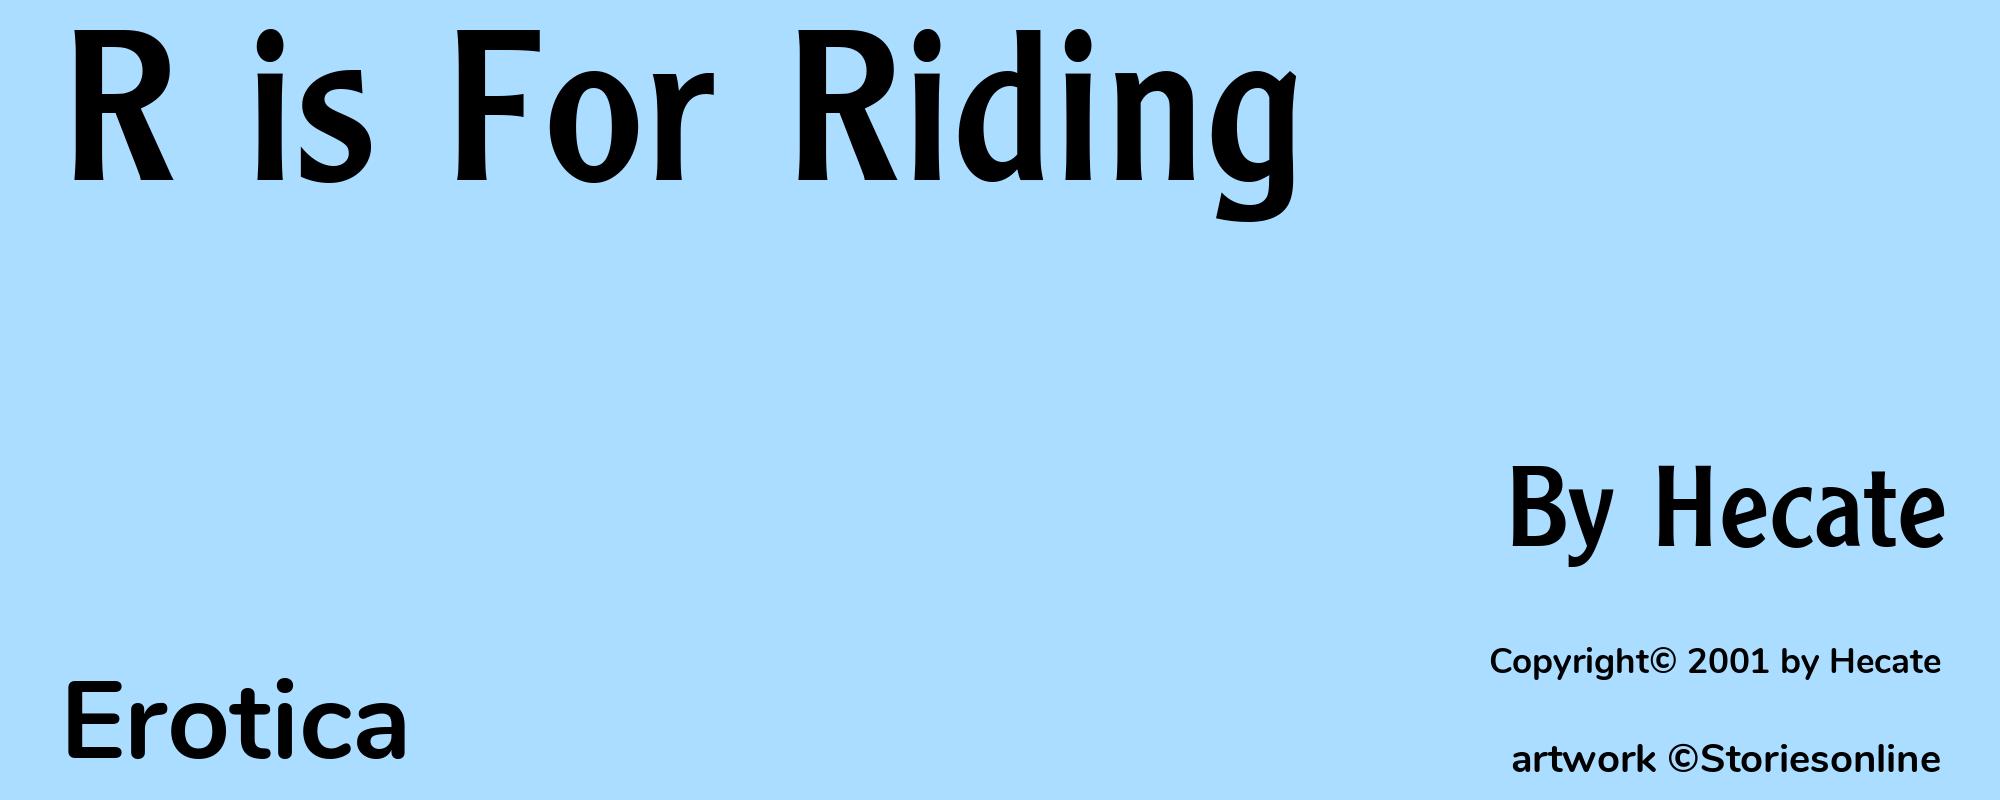 R is For Riding - Cover